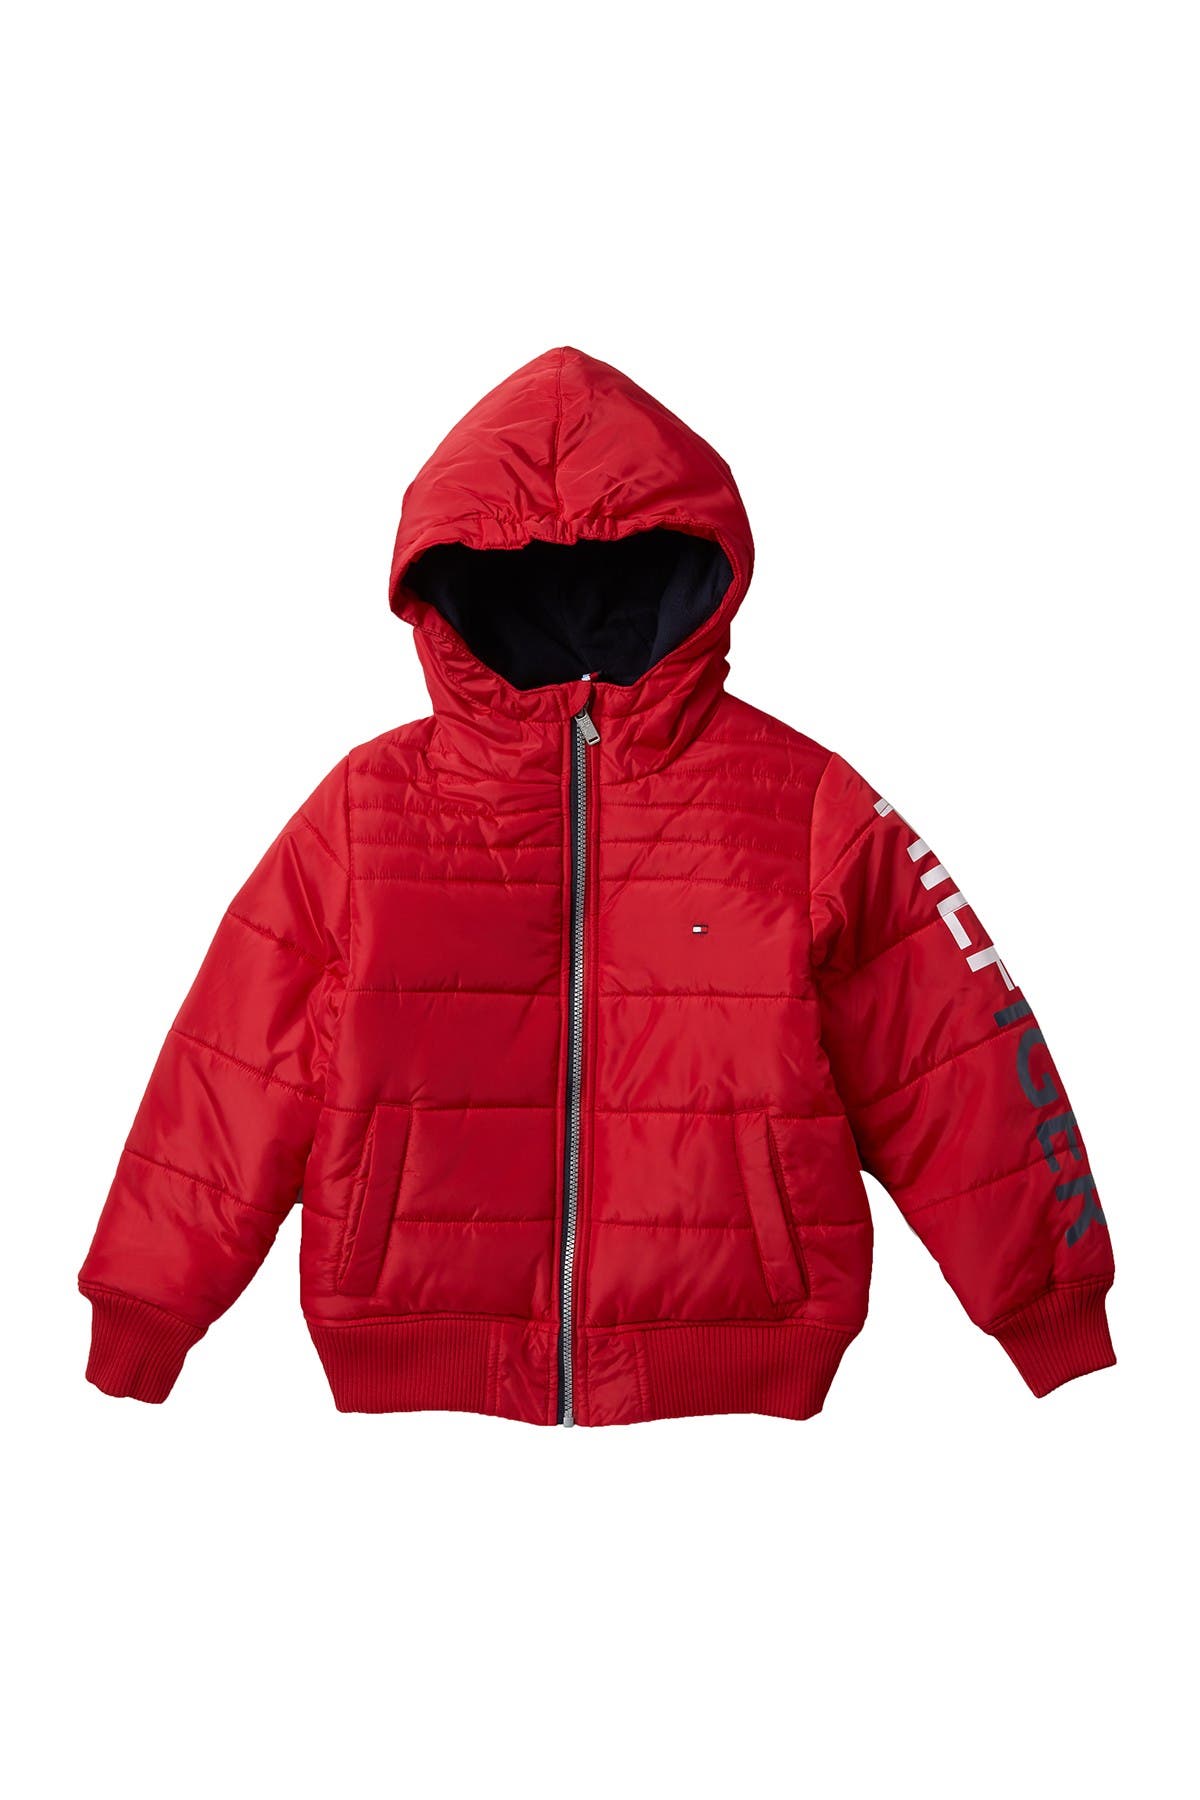 Tommy Hilfiger | Rory Puffer Jacket 